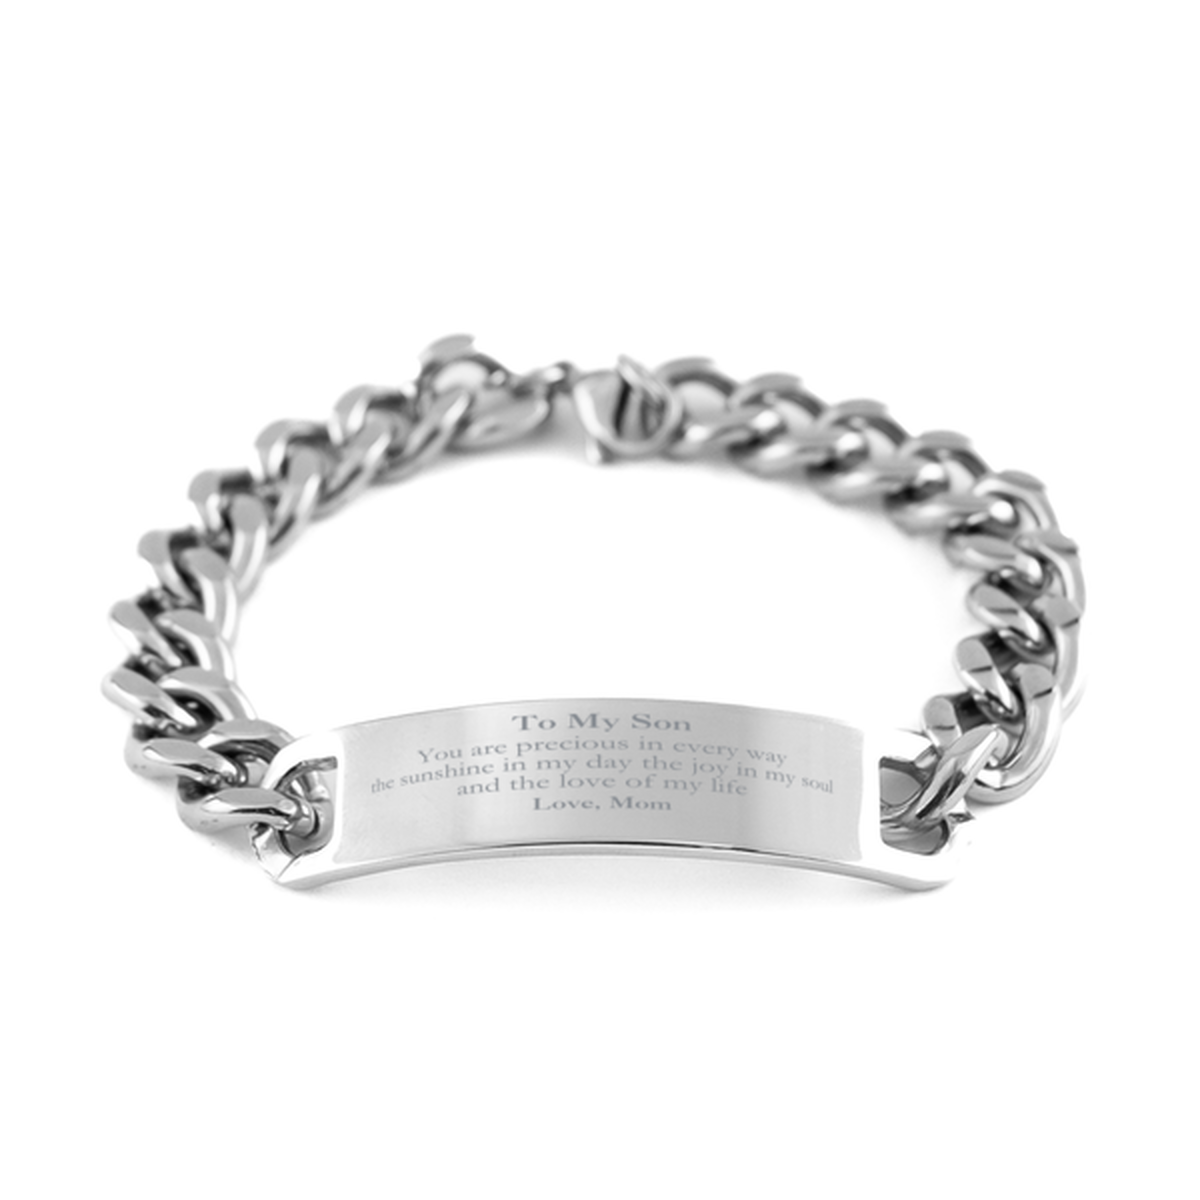 Graduation Gifts for Son Cuban Chain Stainless Steel Bracelet Present from Mom, Christmas Son Birthday Gifts Son You are precious in every way the sunshine in my day. Love, Mom